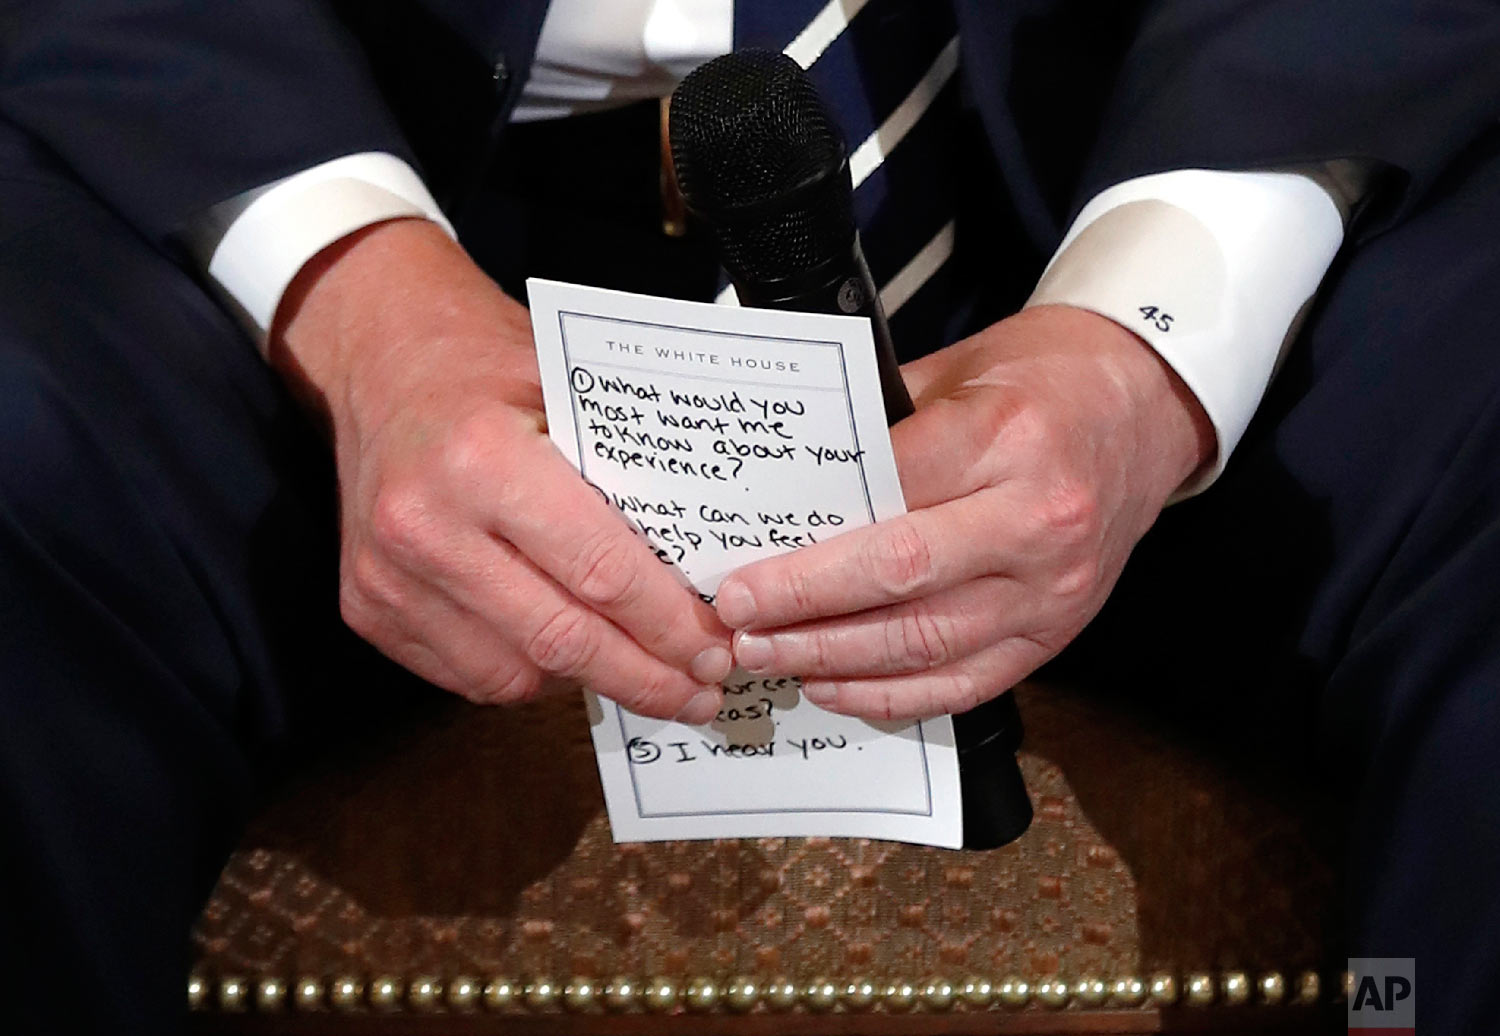  President Donald Trump holds notes during a listening session with high school students and teachers at the White House in Washington on Feb. 21, 2018. Trump heard the stories of students and parents affected by school shootings, one week after the 